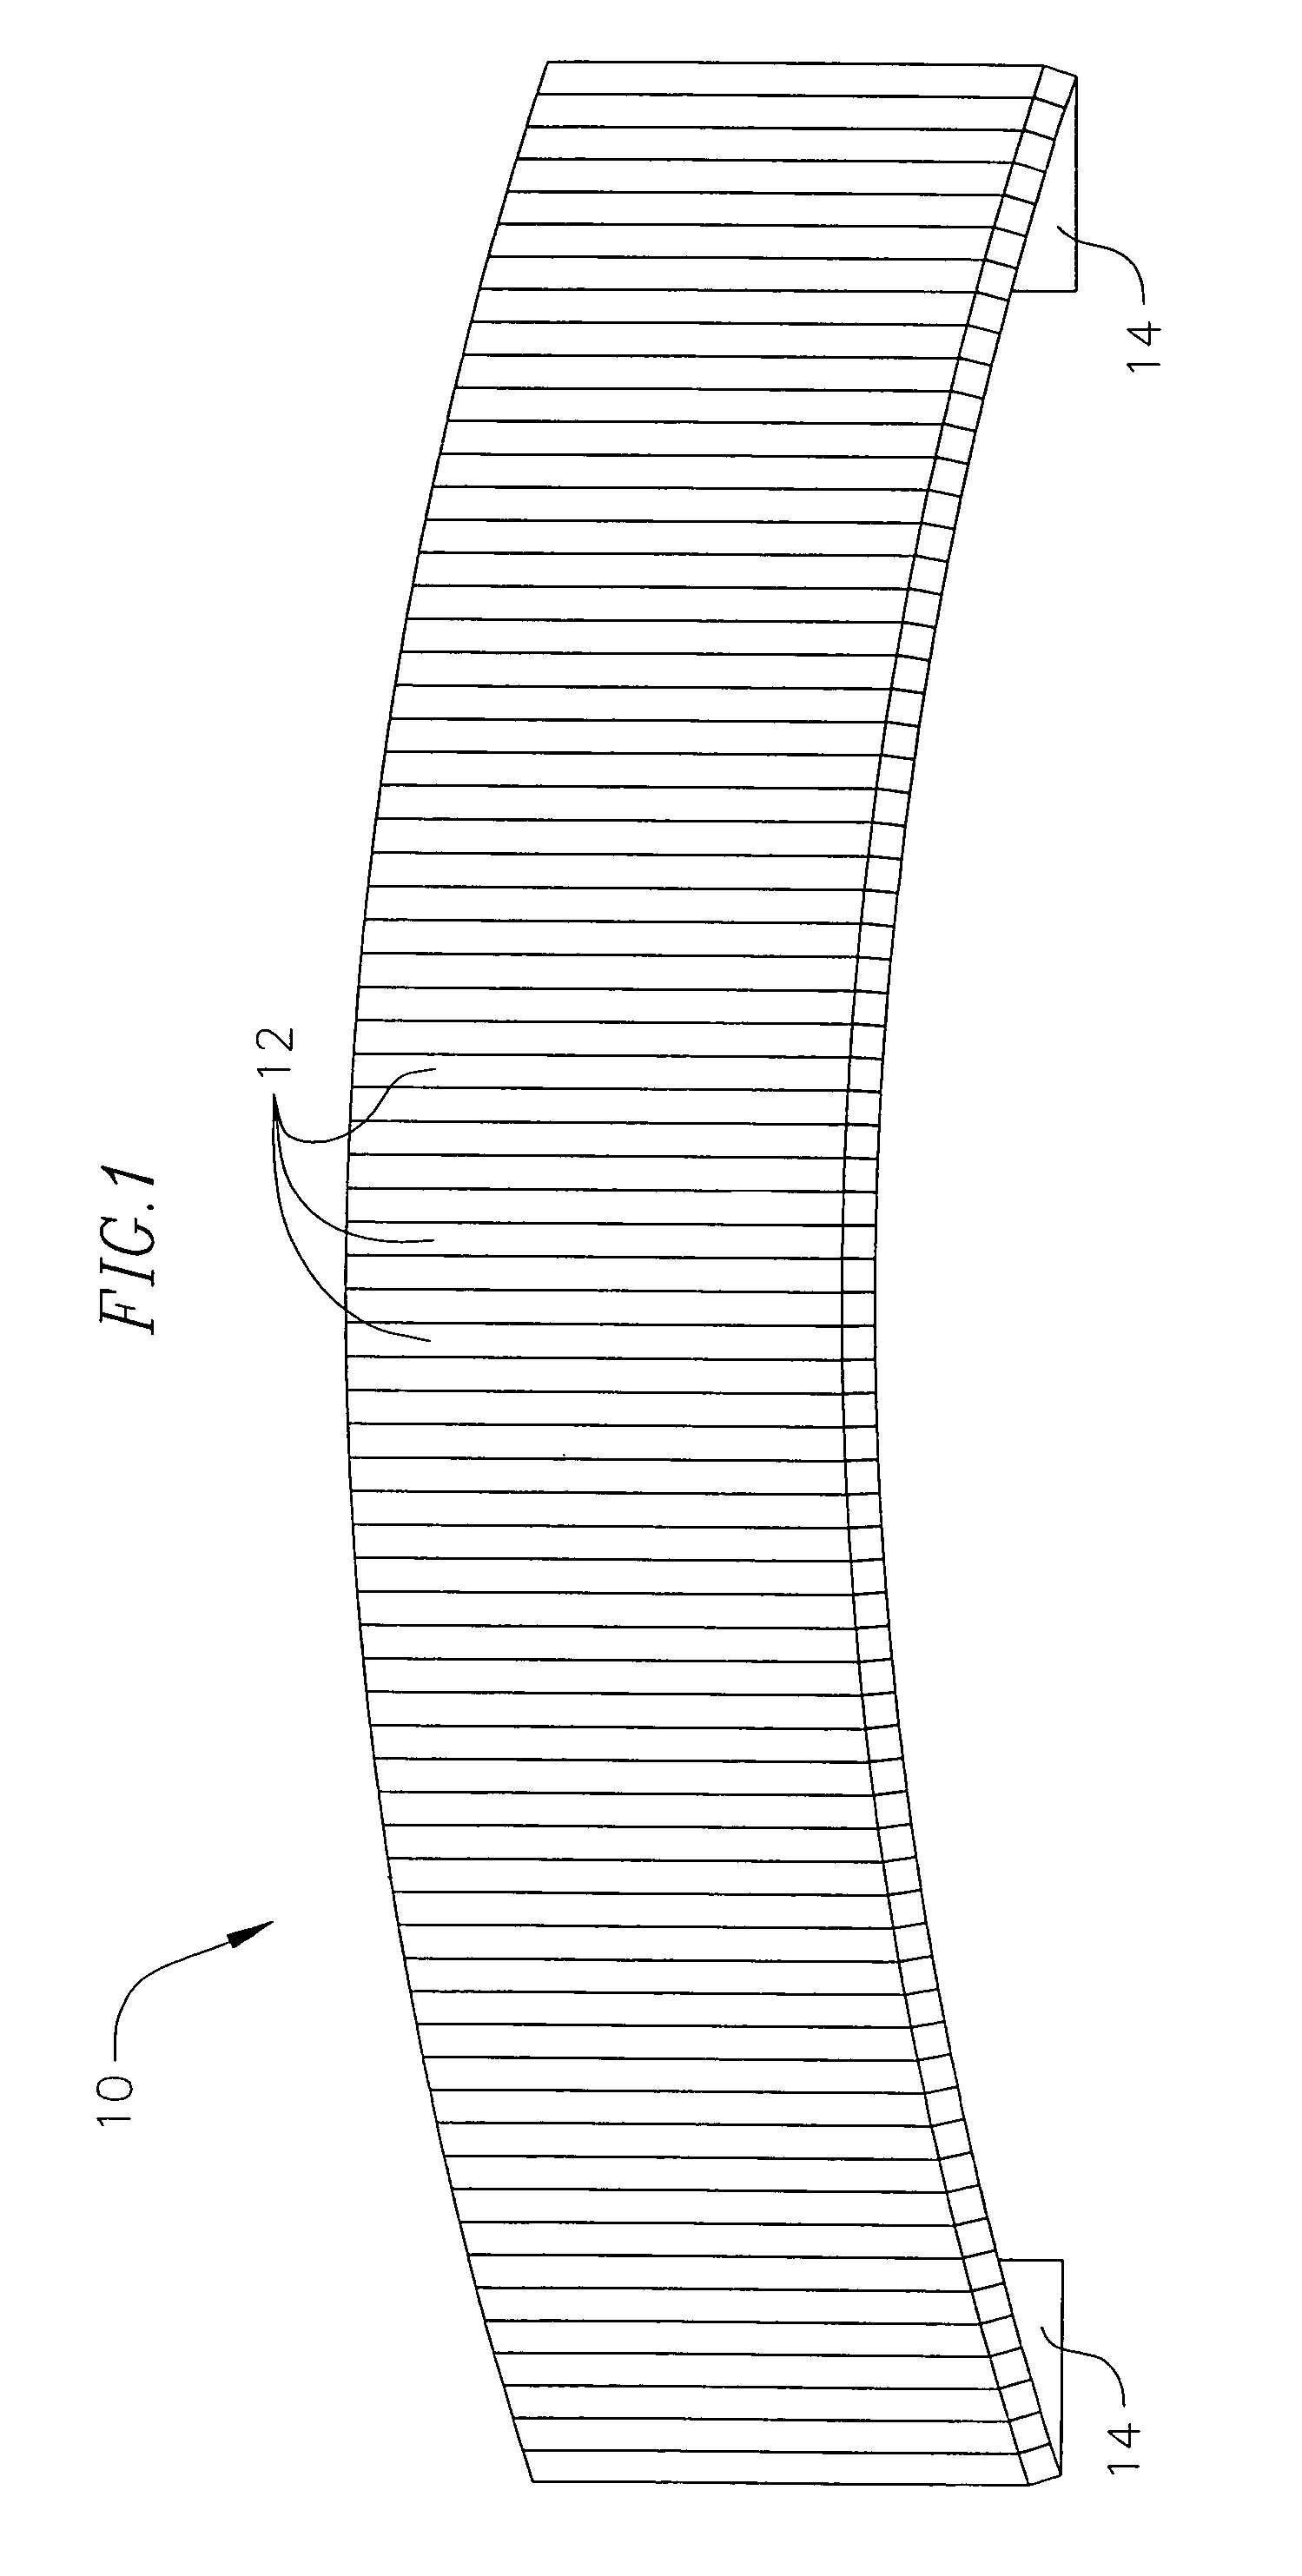 Mobile compression and tension bridge and shelter structure